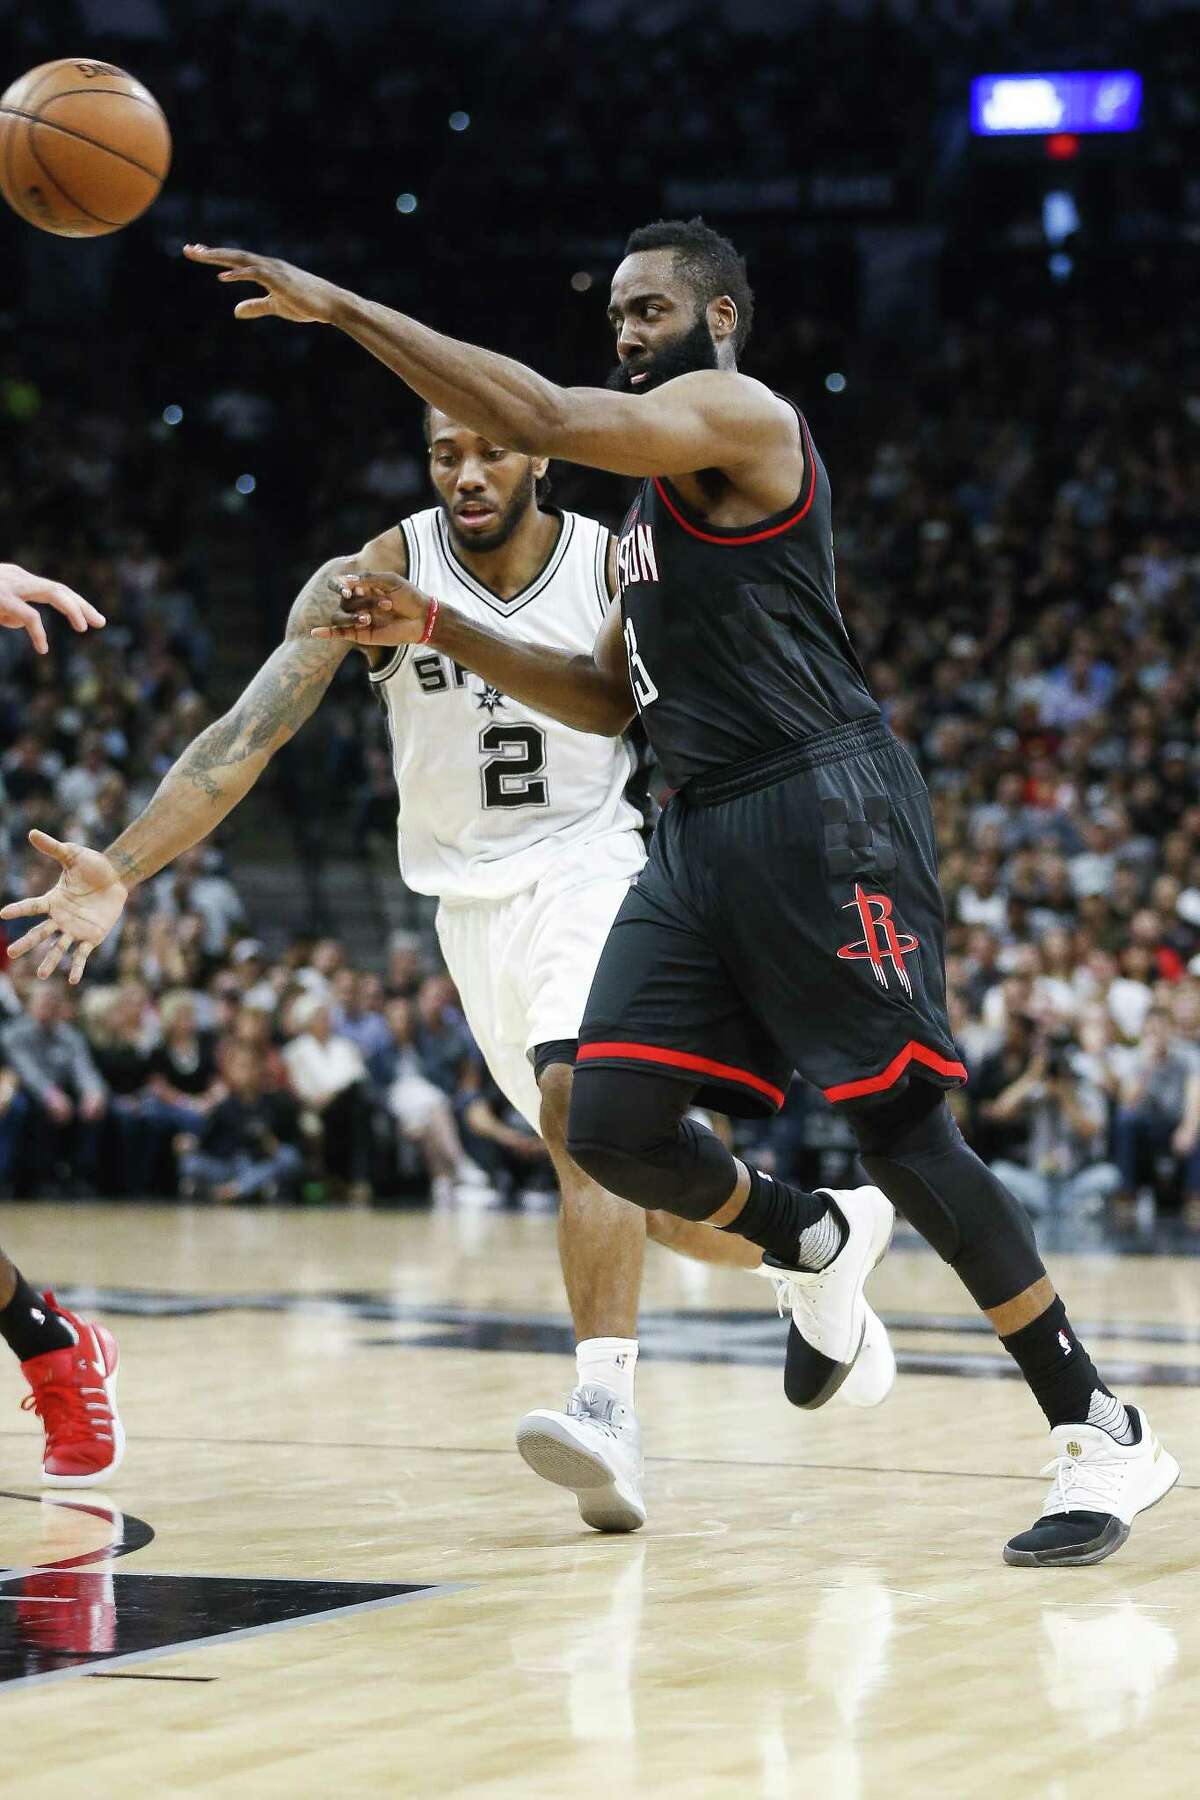 Rockets guard James Harden makes a pass past Spurs forward Kawhi Leonard during the first half of Game 5 at the AT&T Center on May 9, 2017, in San Antonio.